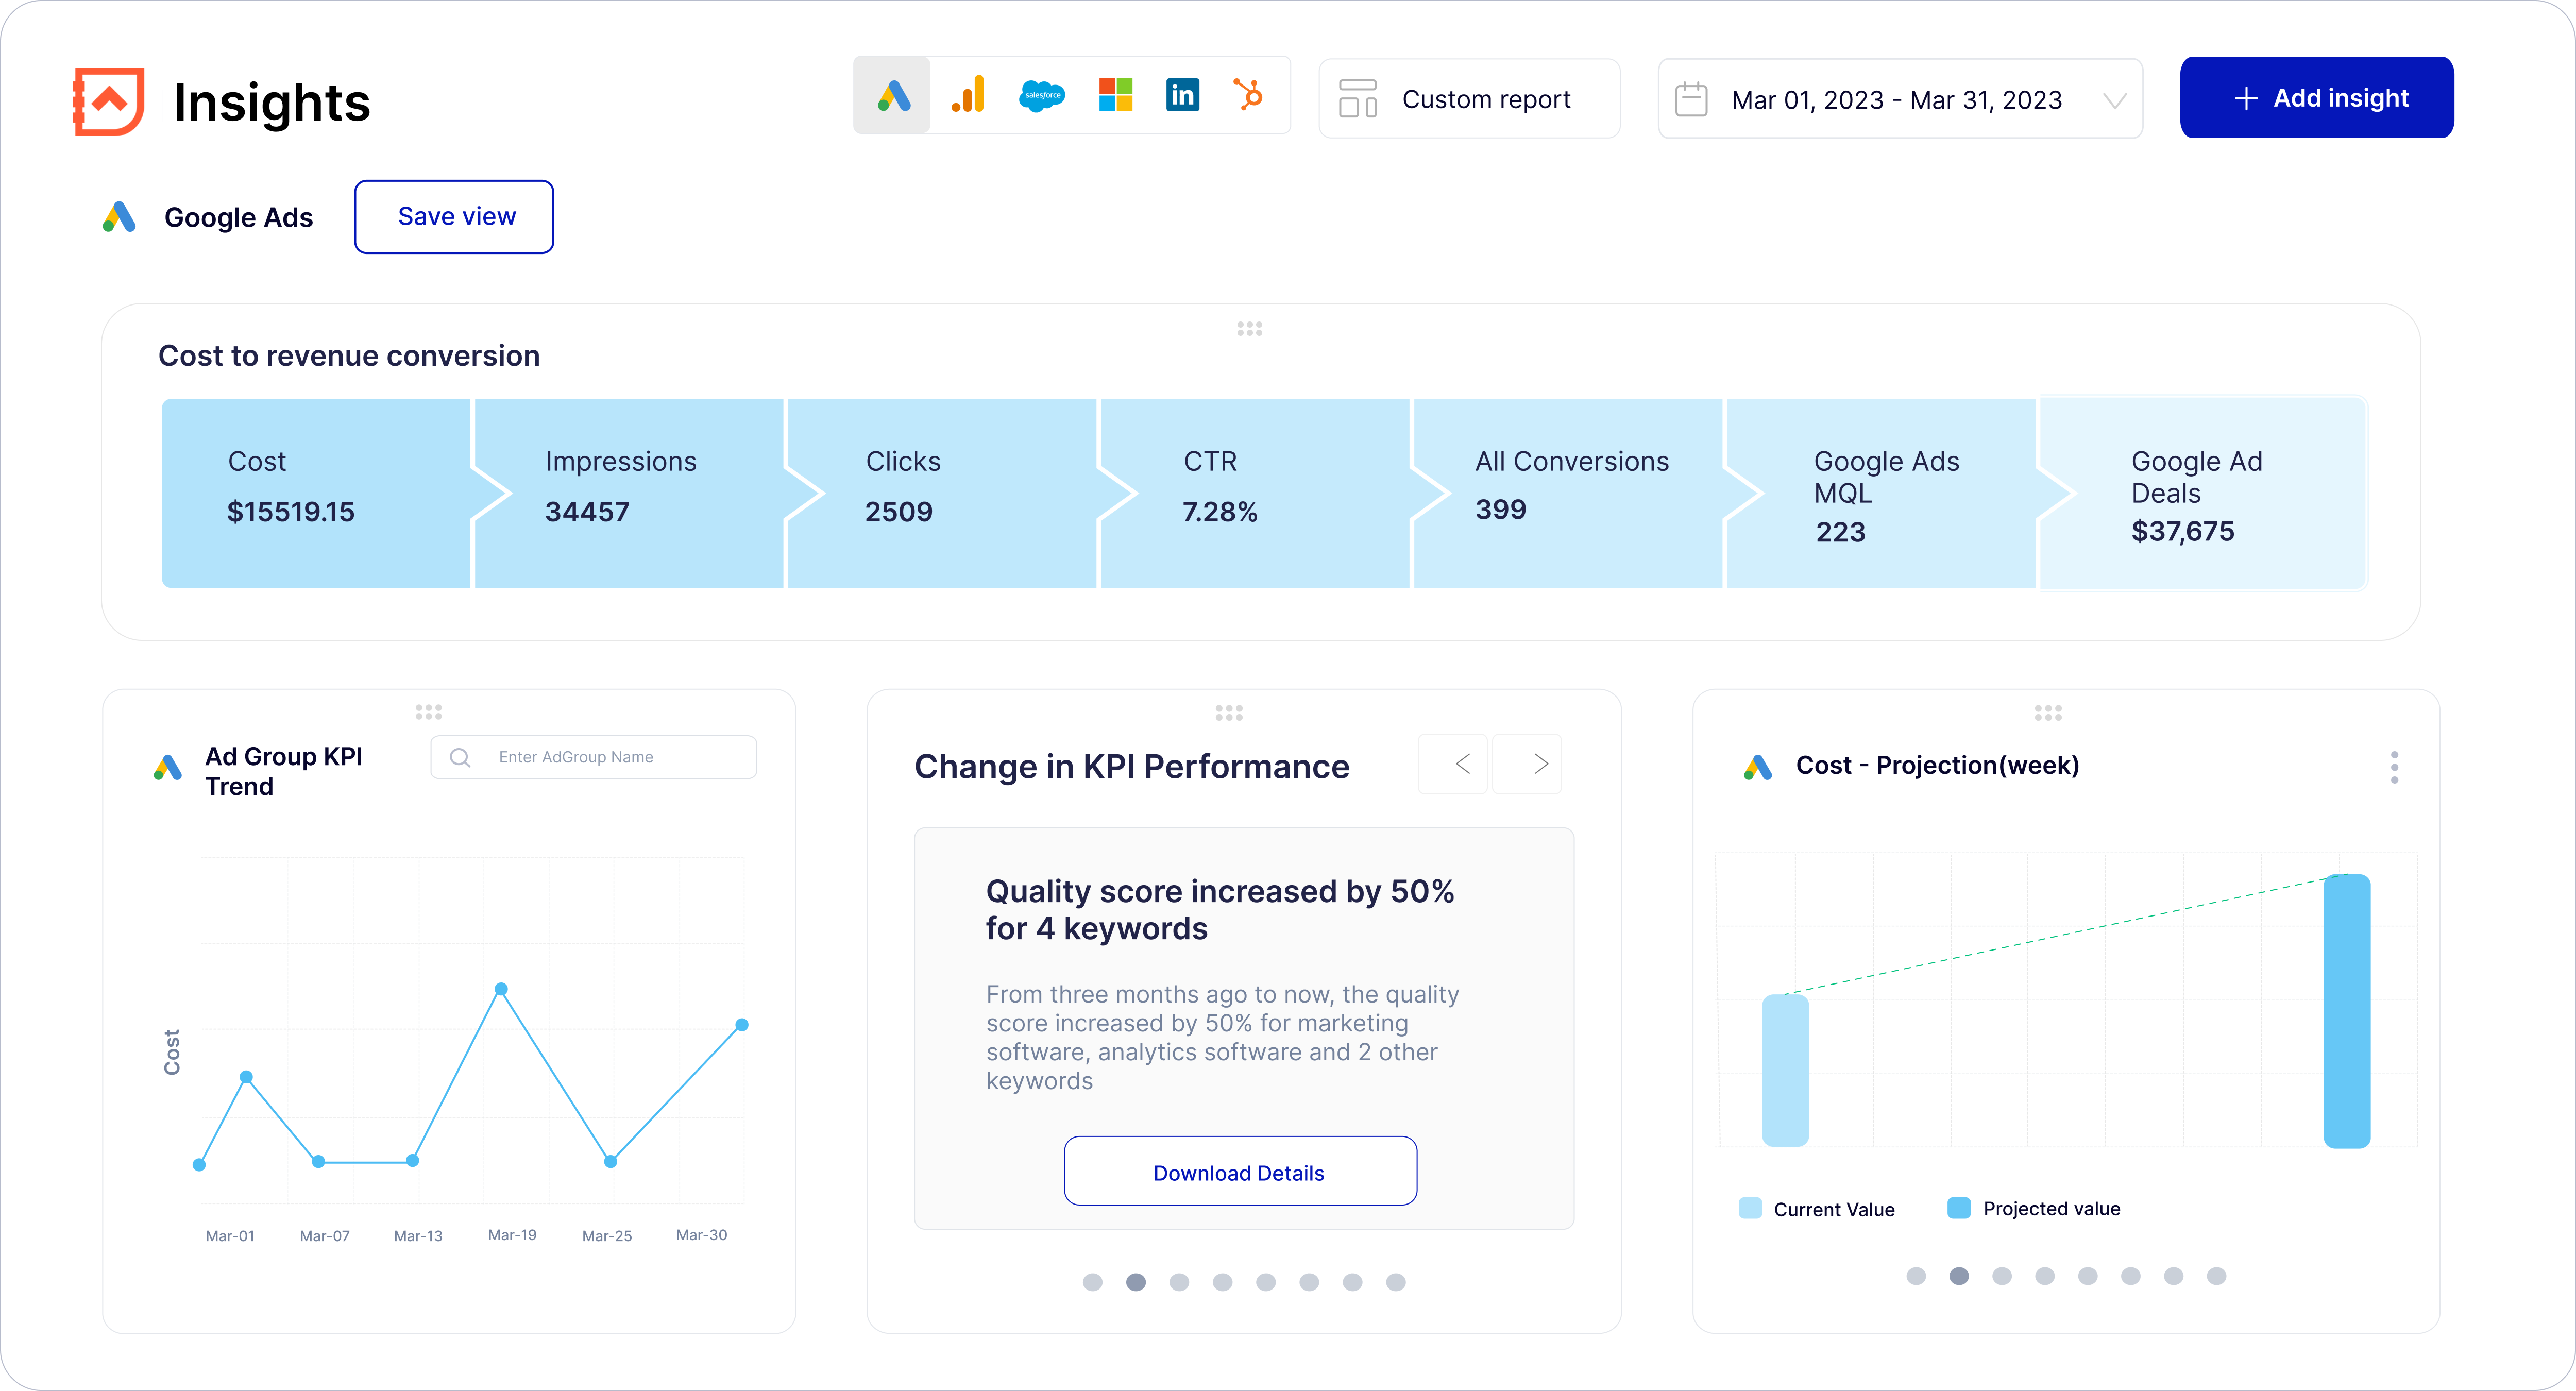 Effortlessly integrate with top MarTech platforms, access expert-vetted dashboards, and quickly set up over 100 pre-designed options with drag-and-drop functionality